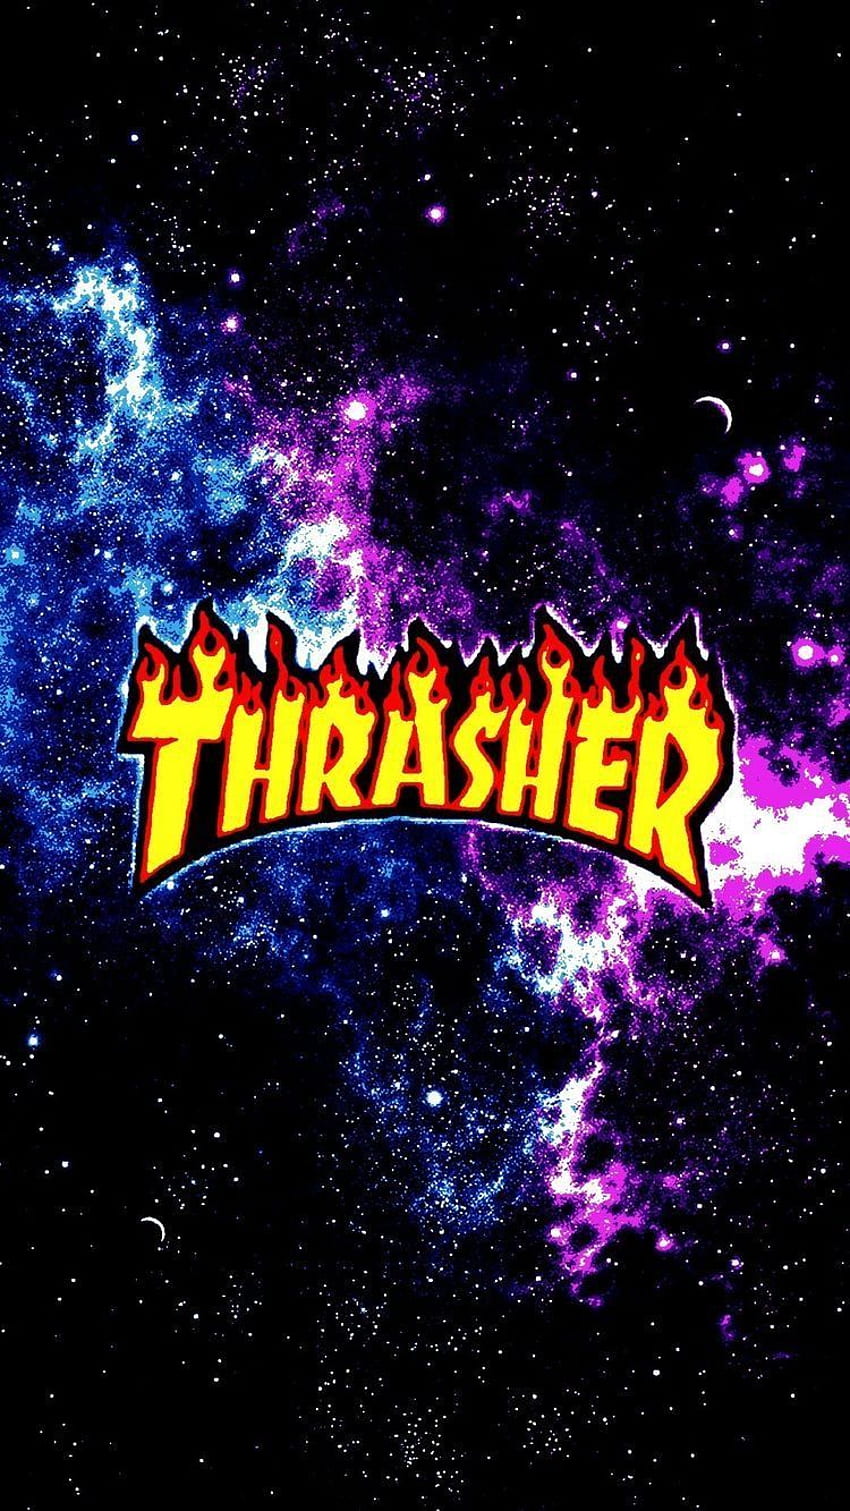 Thrasher - For your HD phone wallpaper